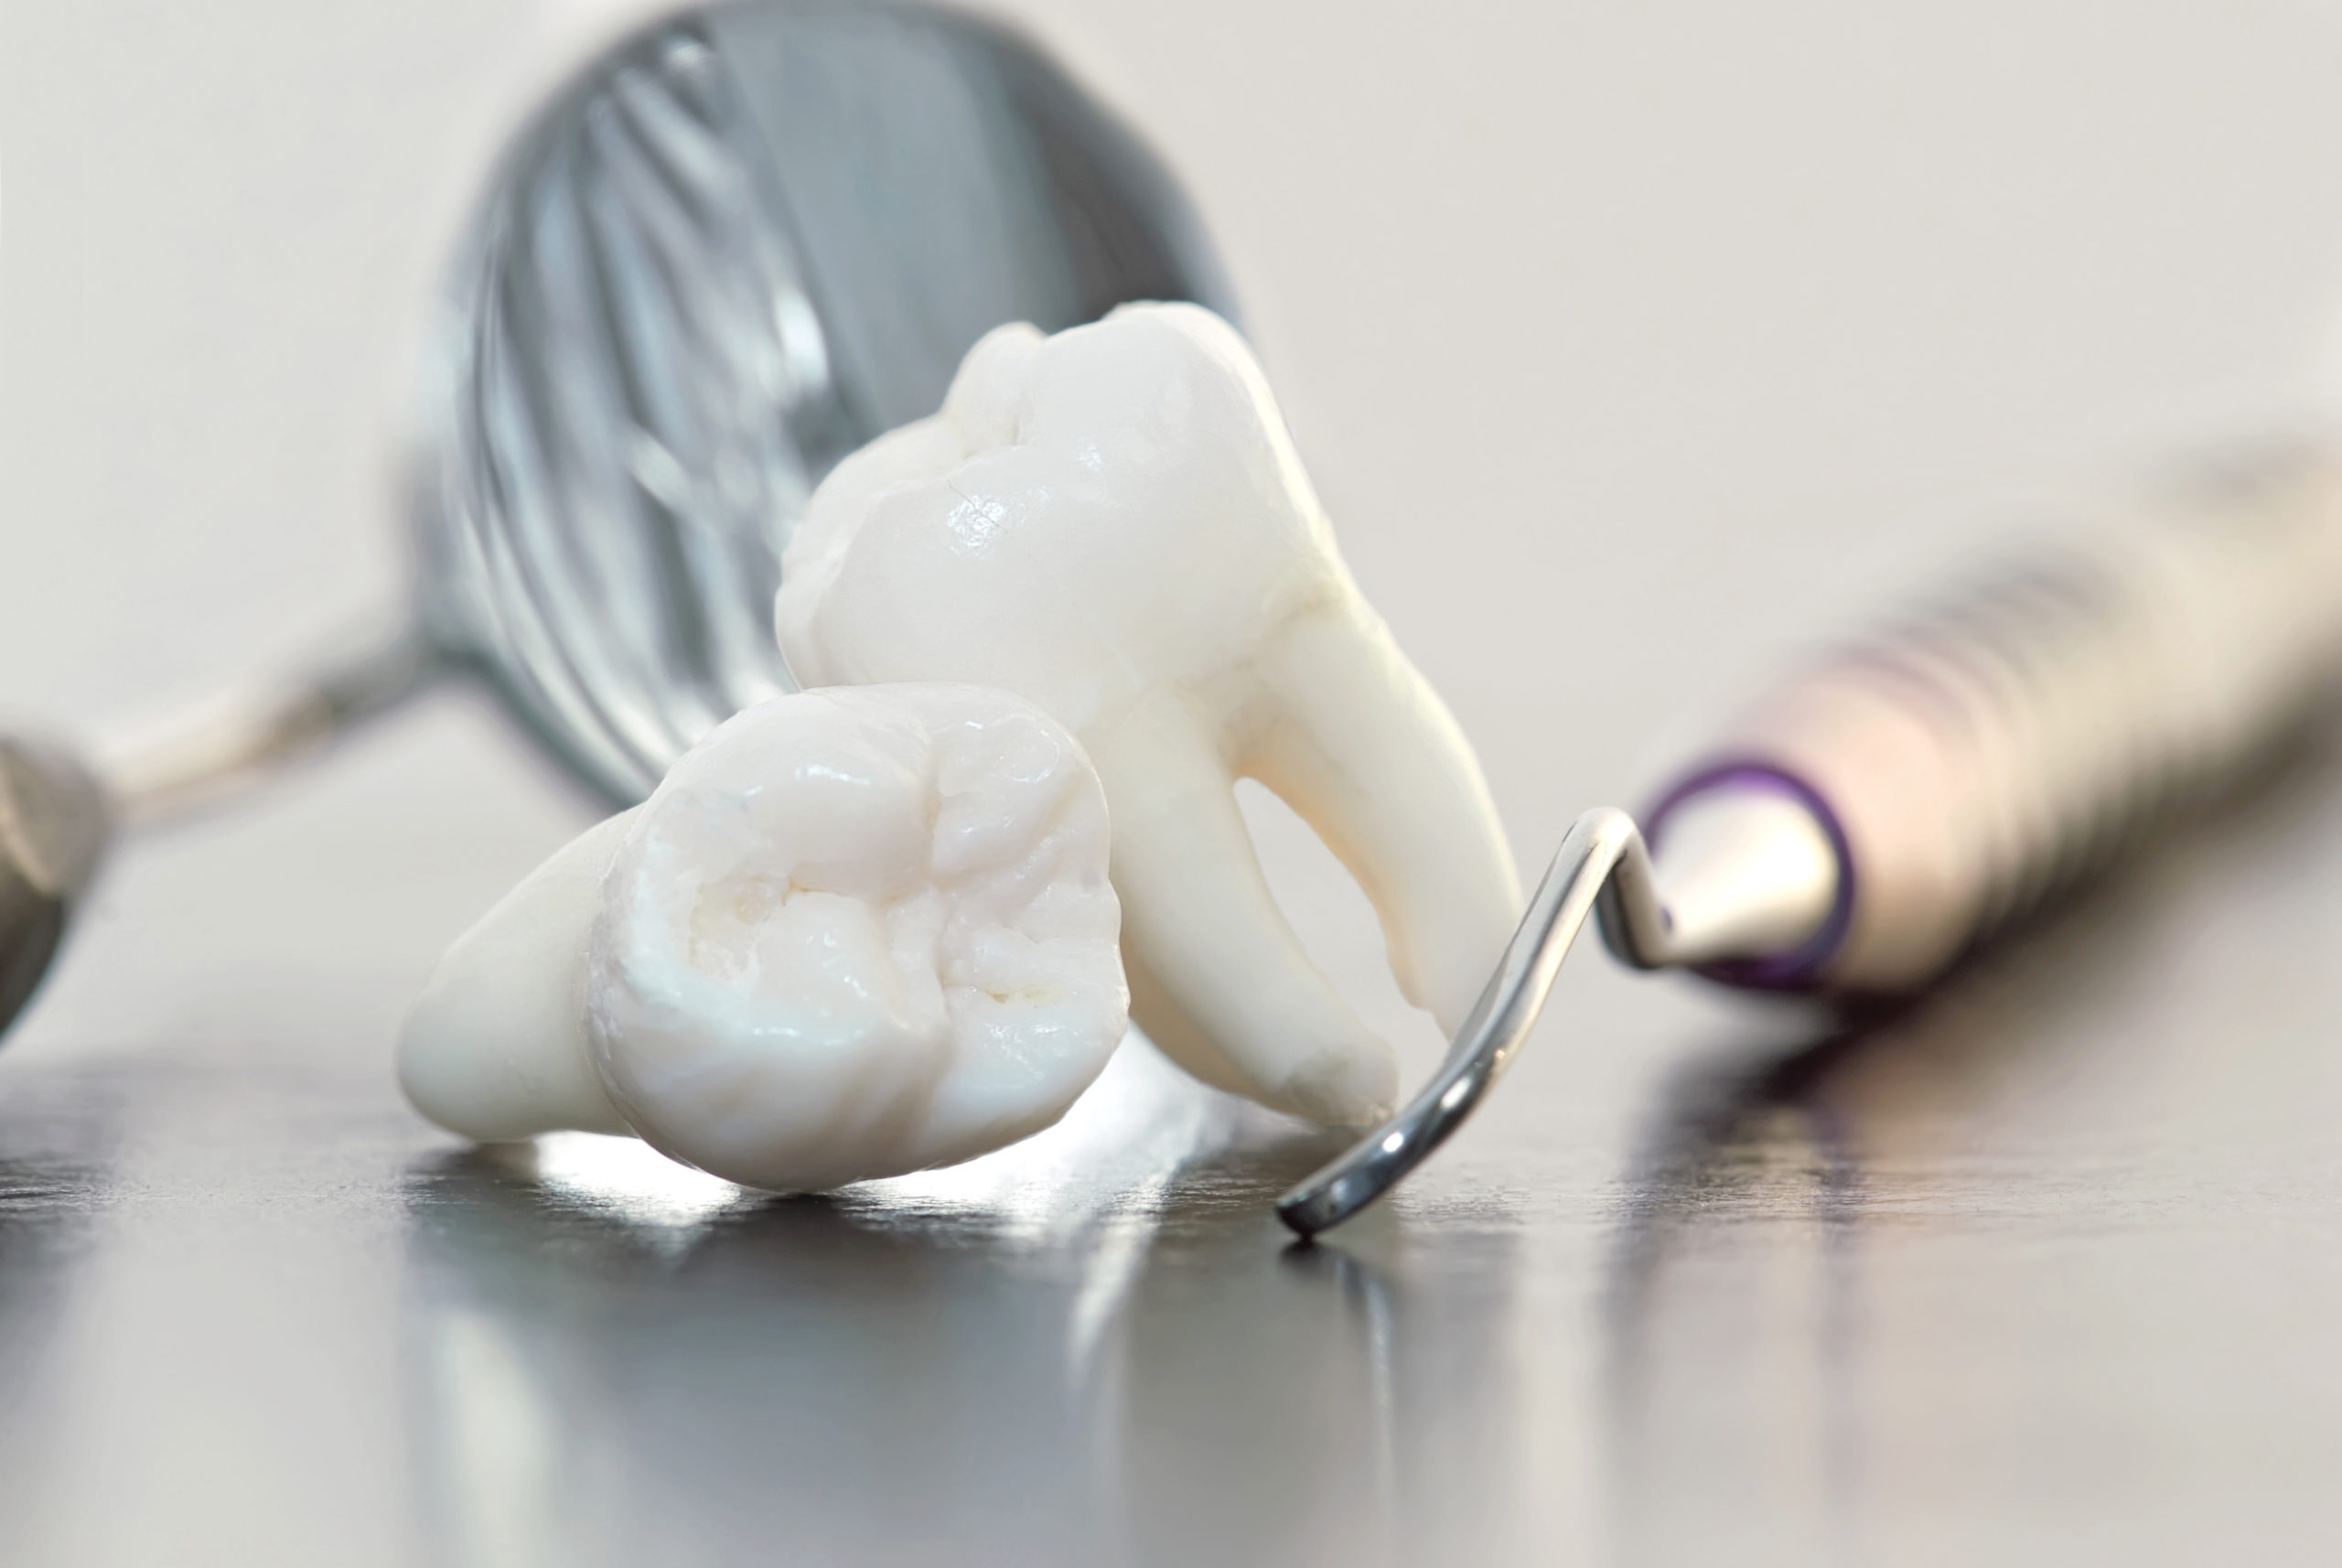 A tooth with a spoon and other tools on the table.